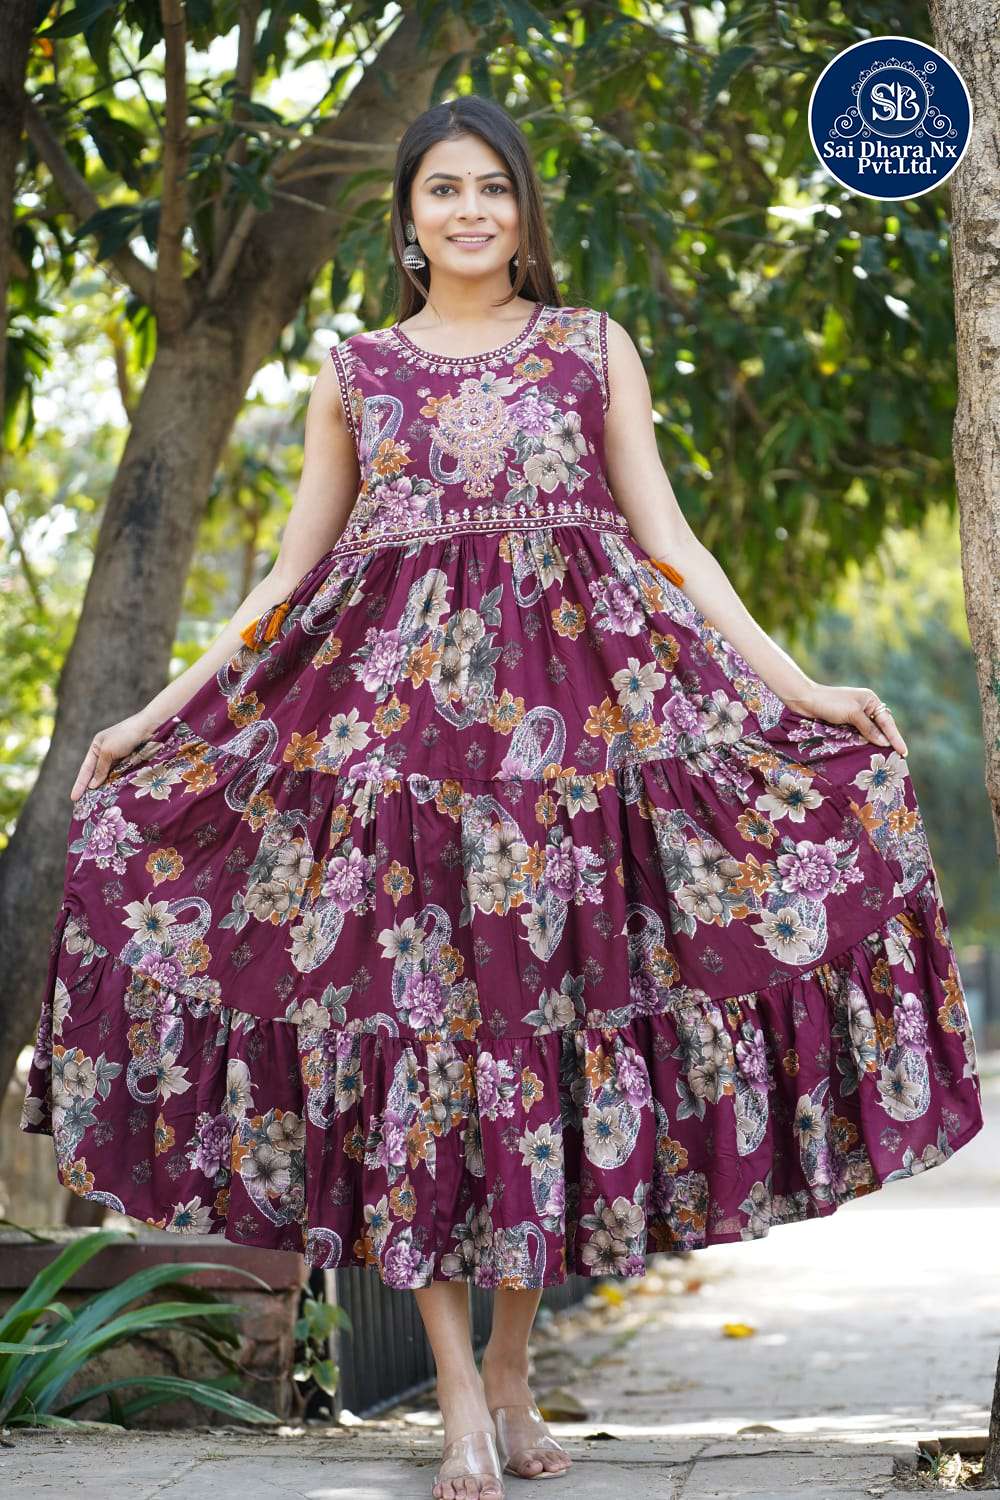 SAIDHARANX PRESENTS PURE COTTON BASED ROUND BOTTOM NEW DESIGN PURPLE READYMADE GOWN COLLECTION WHOLESALE SHOP IN SURAT - SaiDharaNx